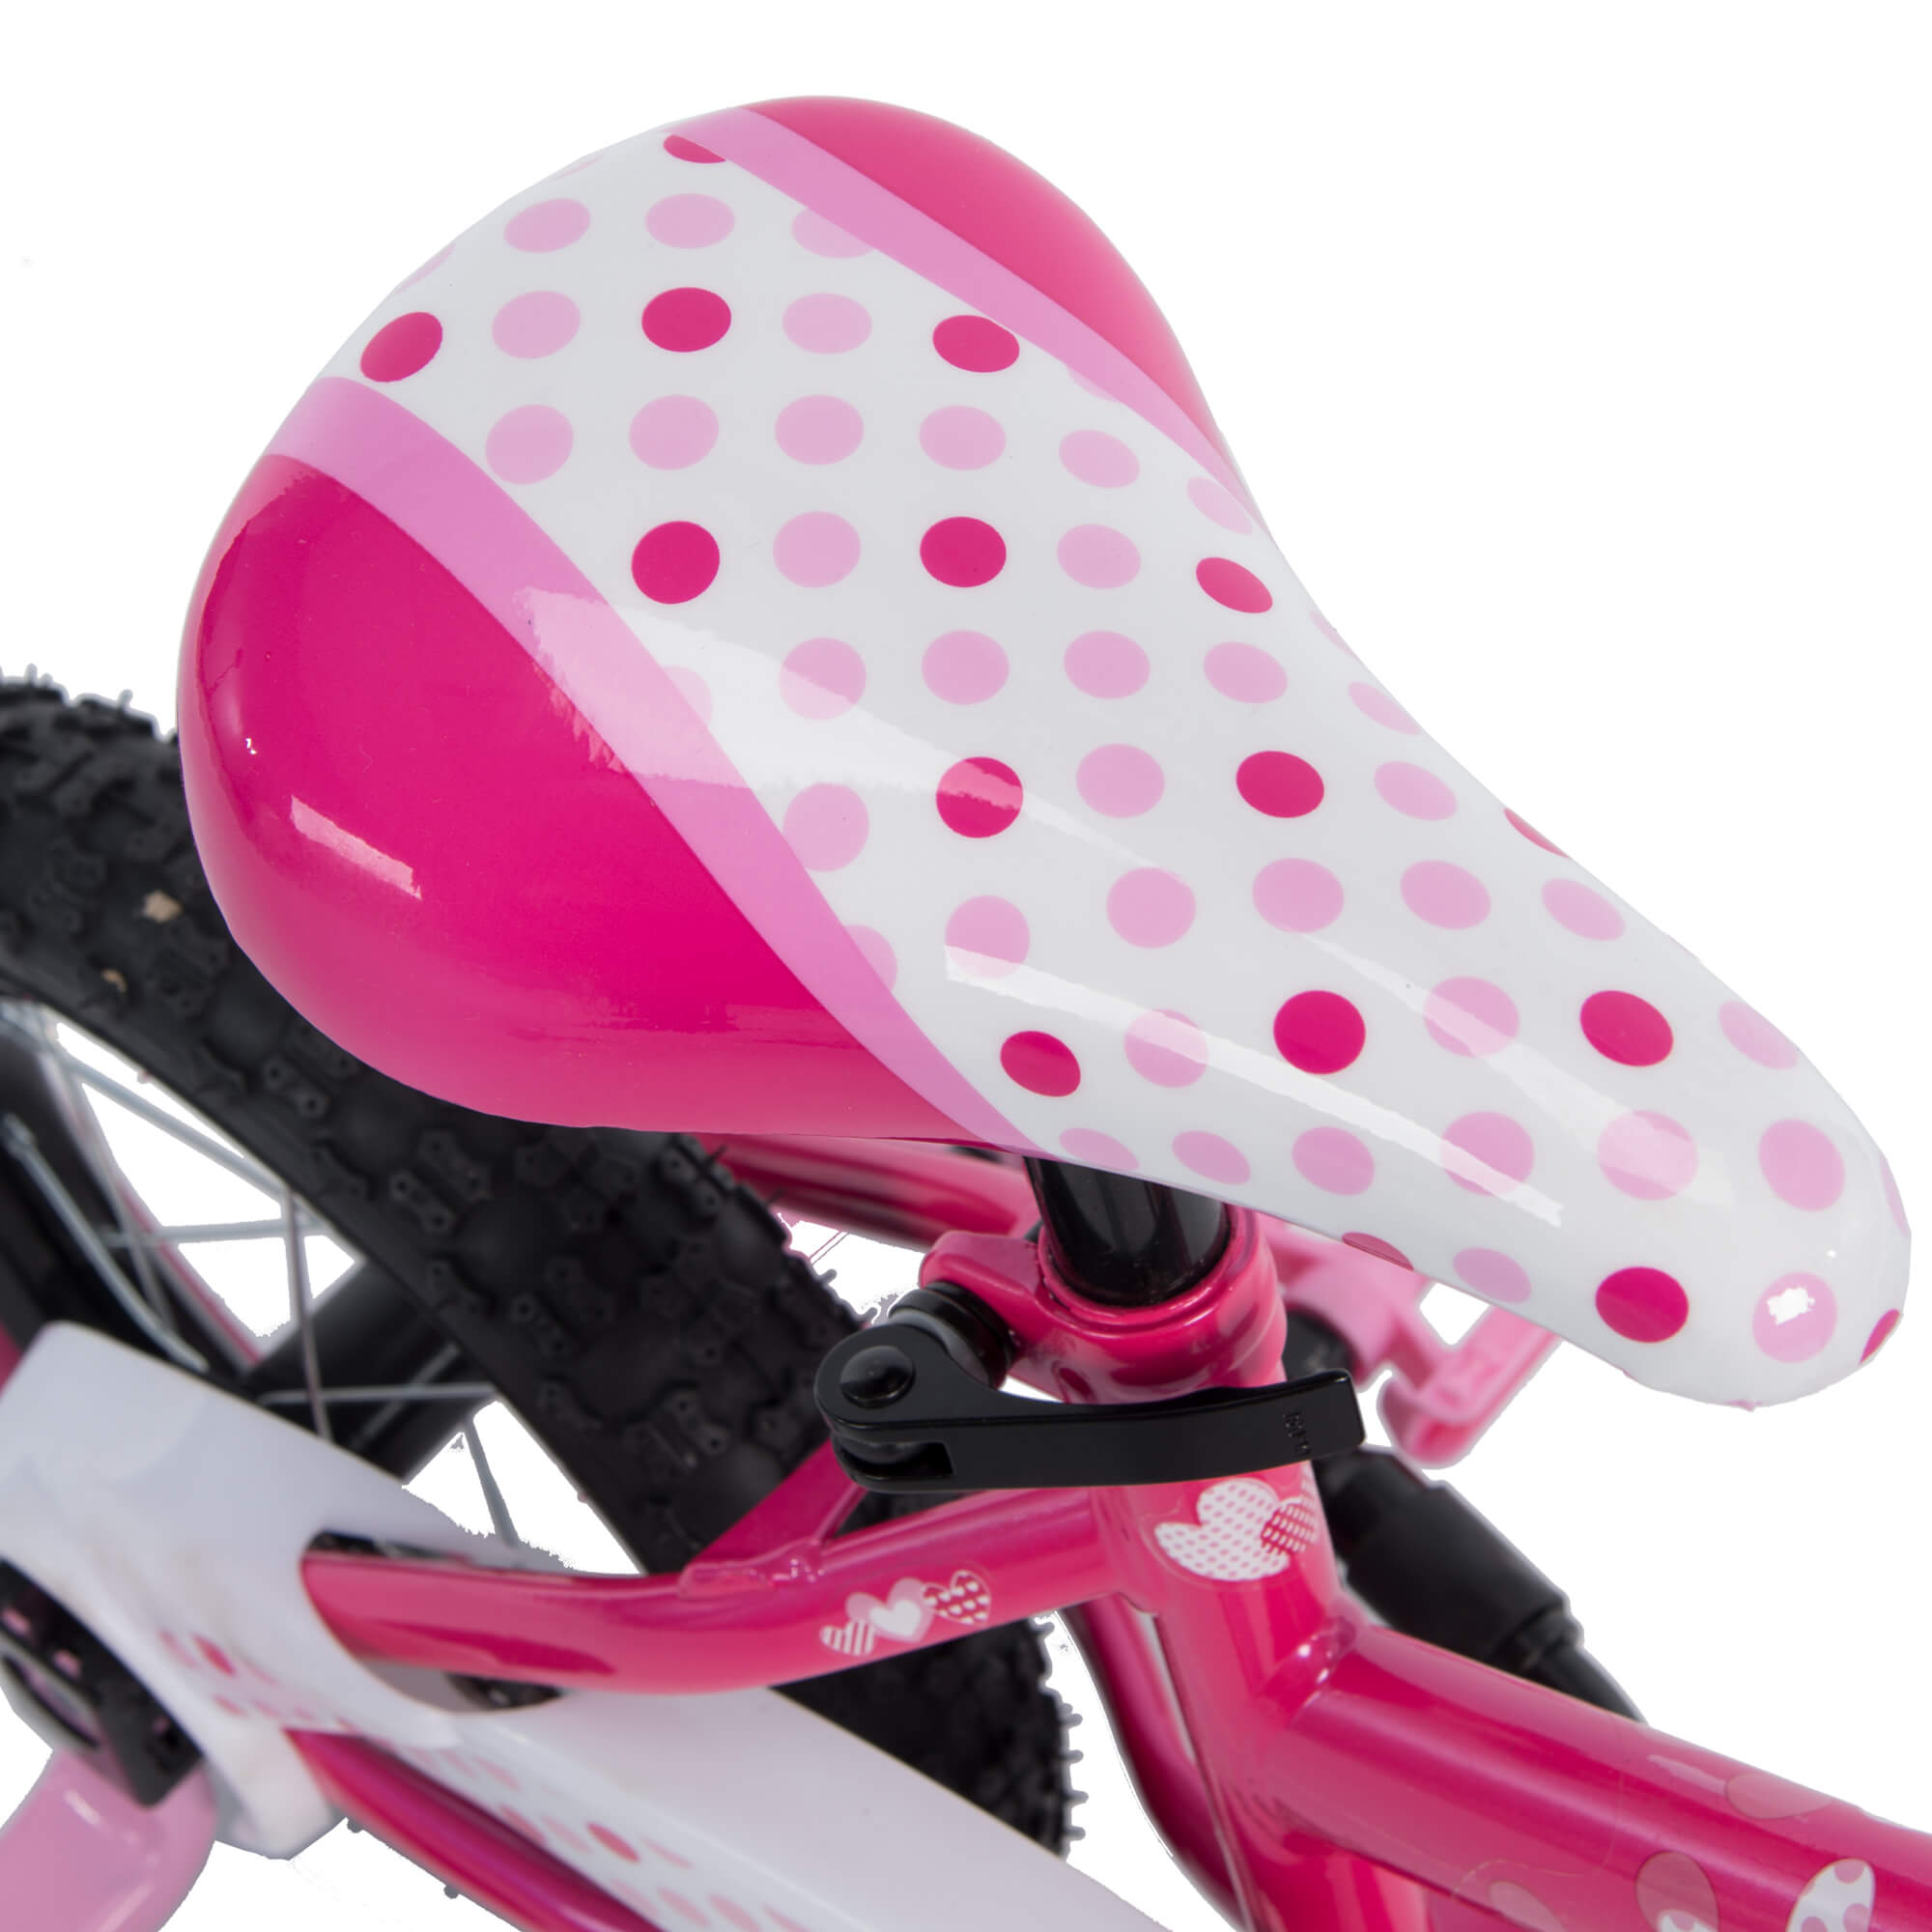 Disney Minnie Mouse 12-inch Bike by Huffy, Pink - image 4 of 6